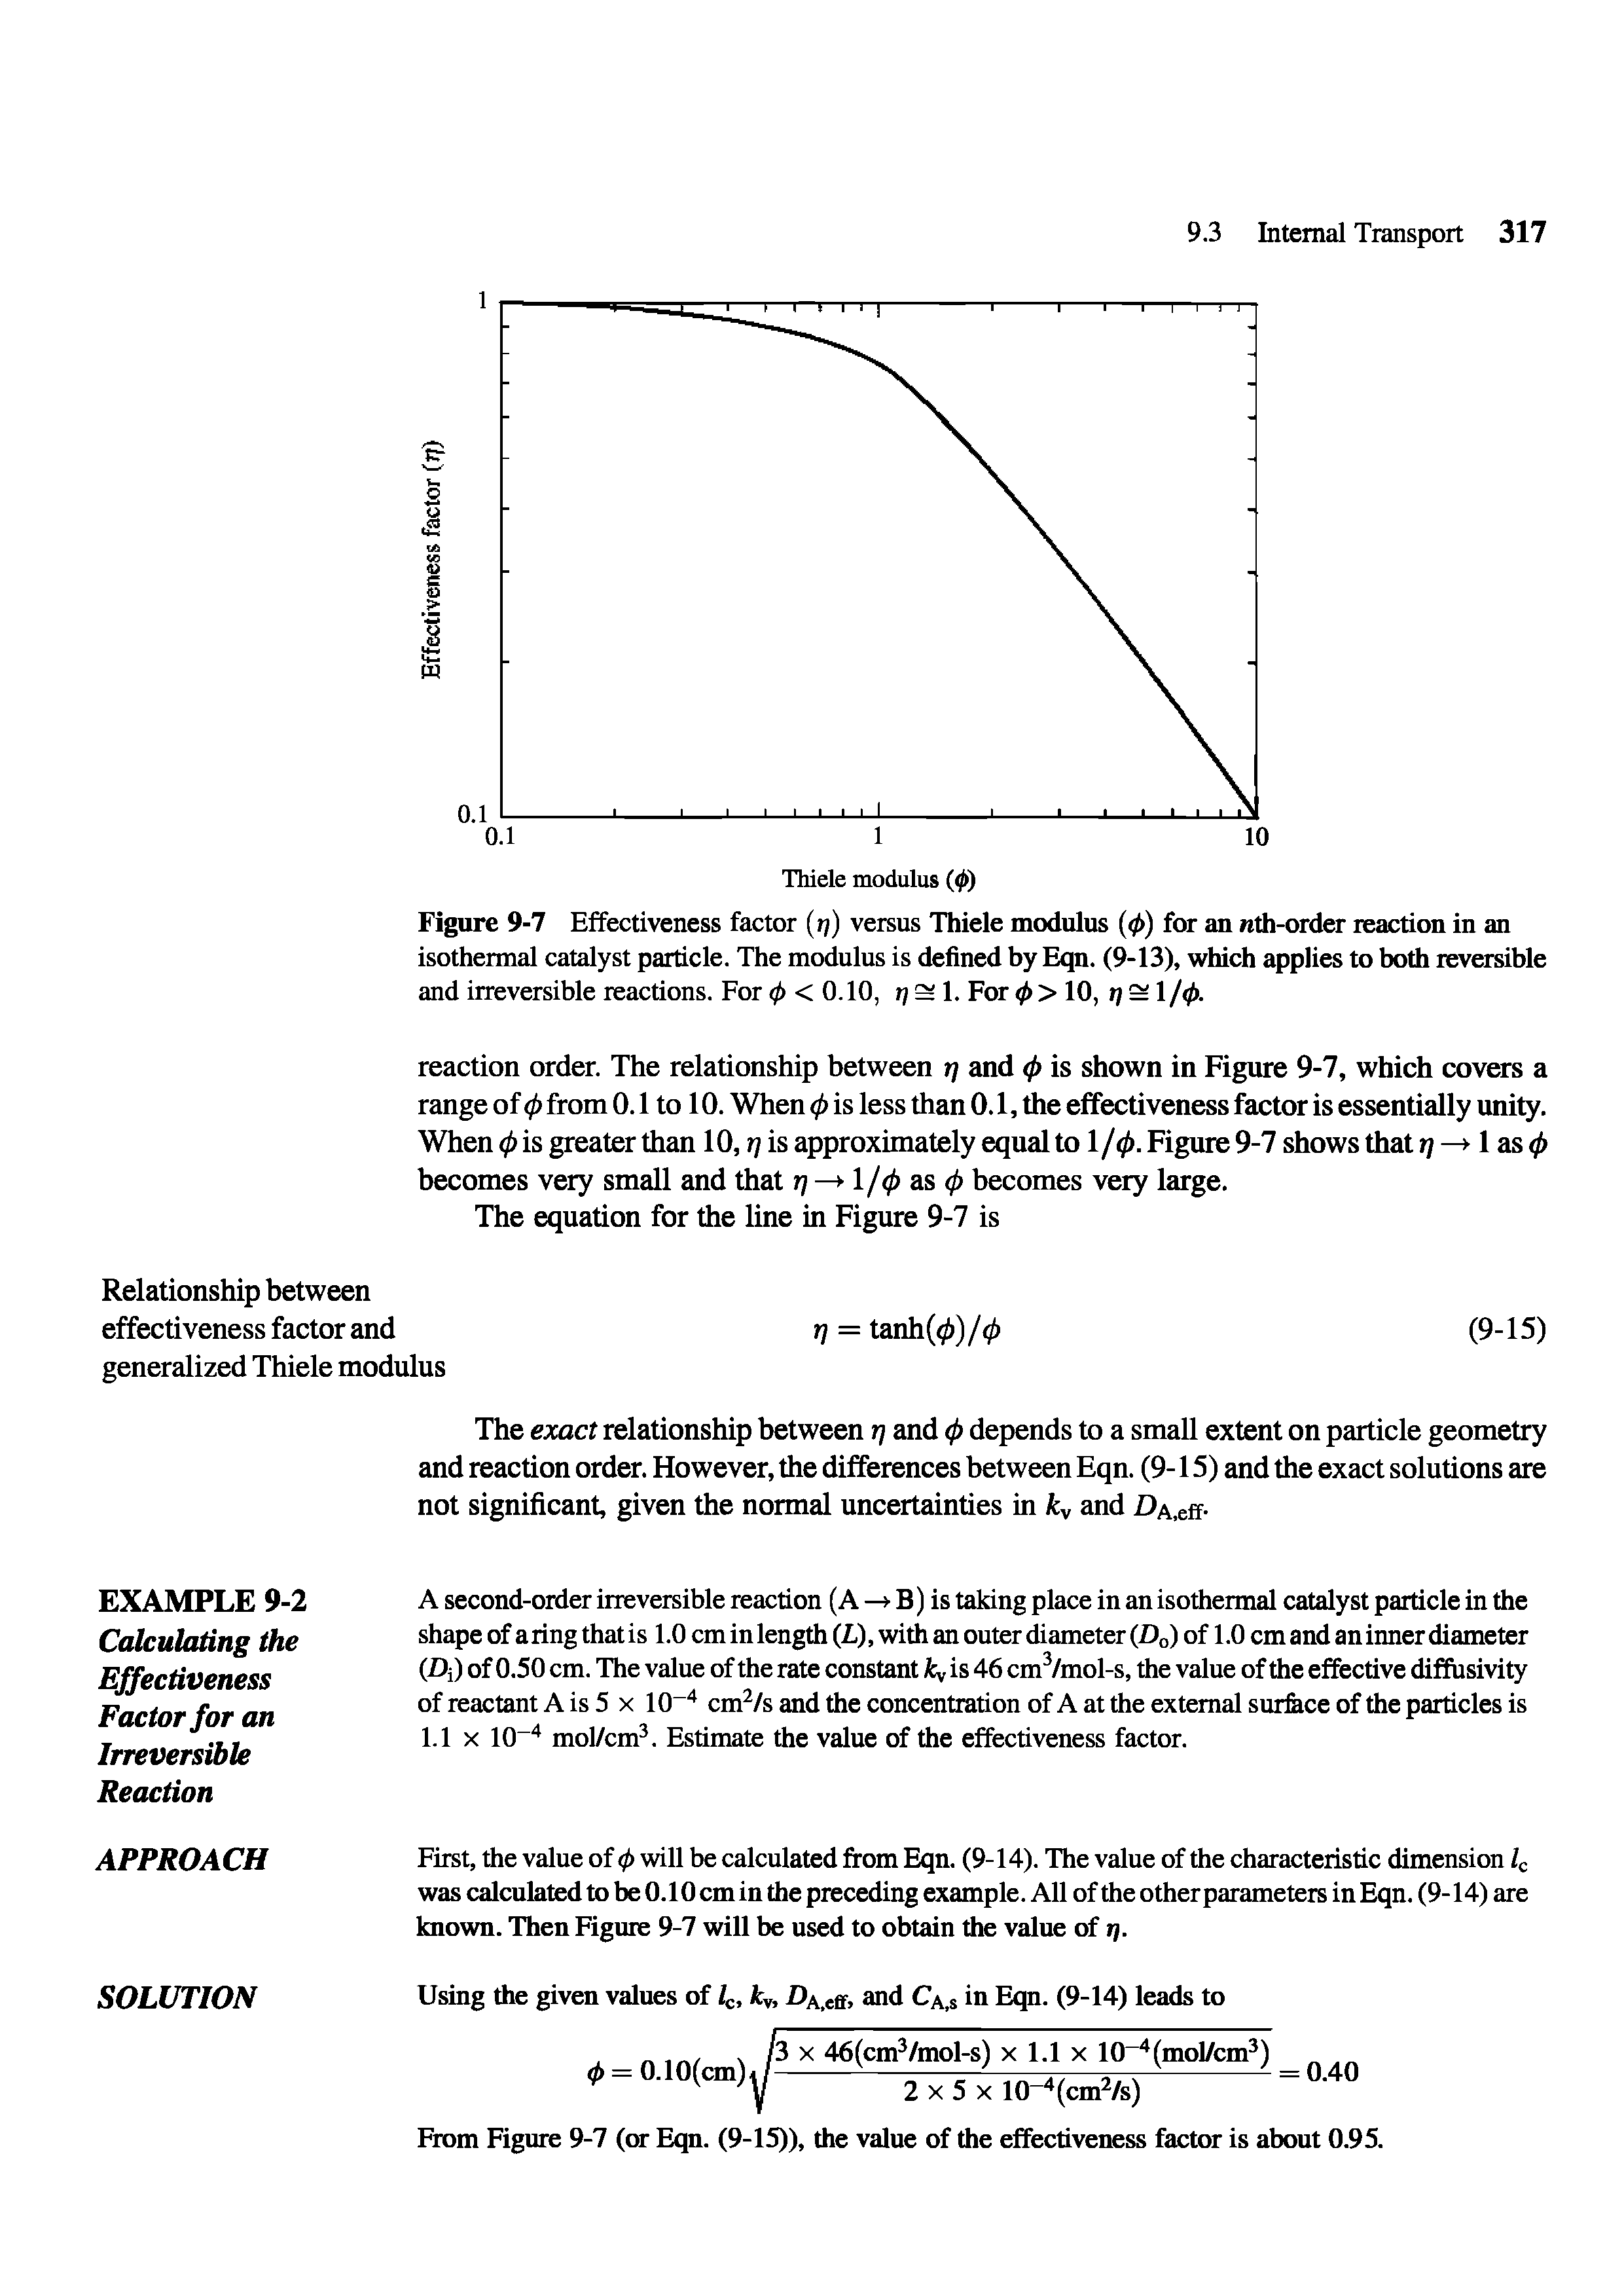 Figure 9-7 Effectiveness factor t]) versus Thiele modulus (0) for an nth-order reaction in an isothermal catalyst particle. The modulus is defined by Eqn. (9-13), which applies to both reversible and irreversible reactions. For < 0.10, t 1. For 0 > 10, i) = 1 /0.